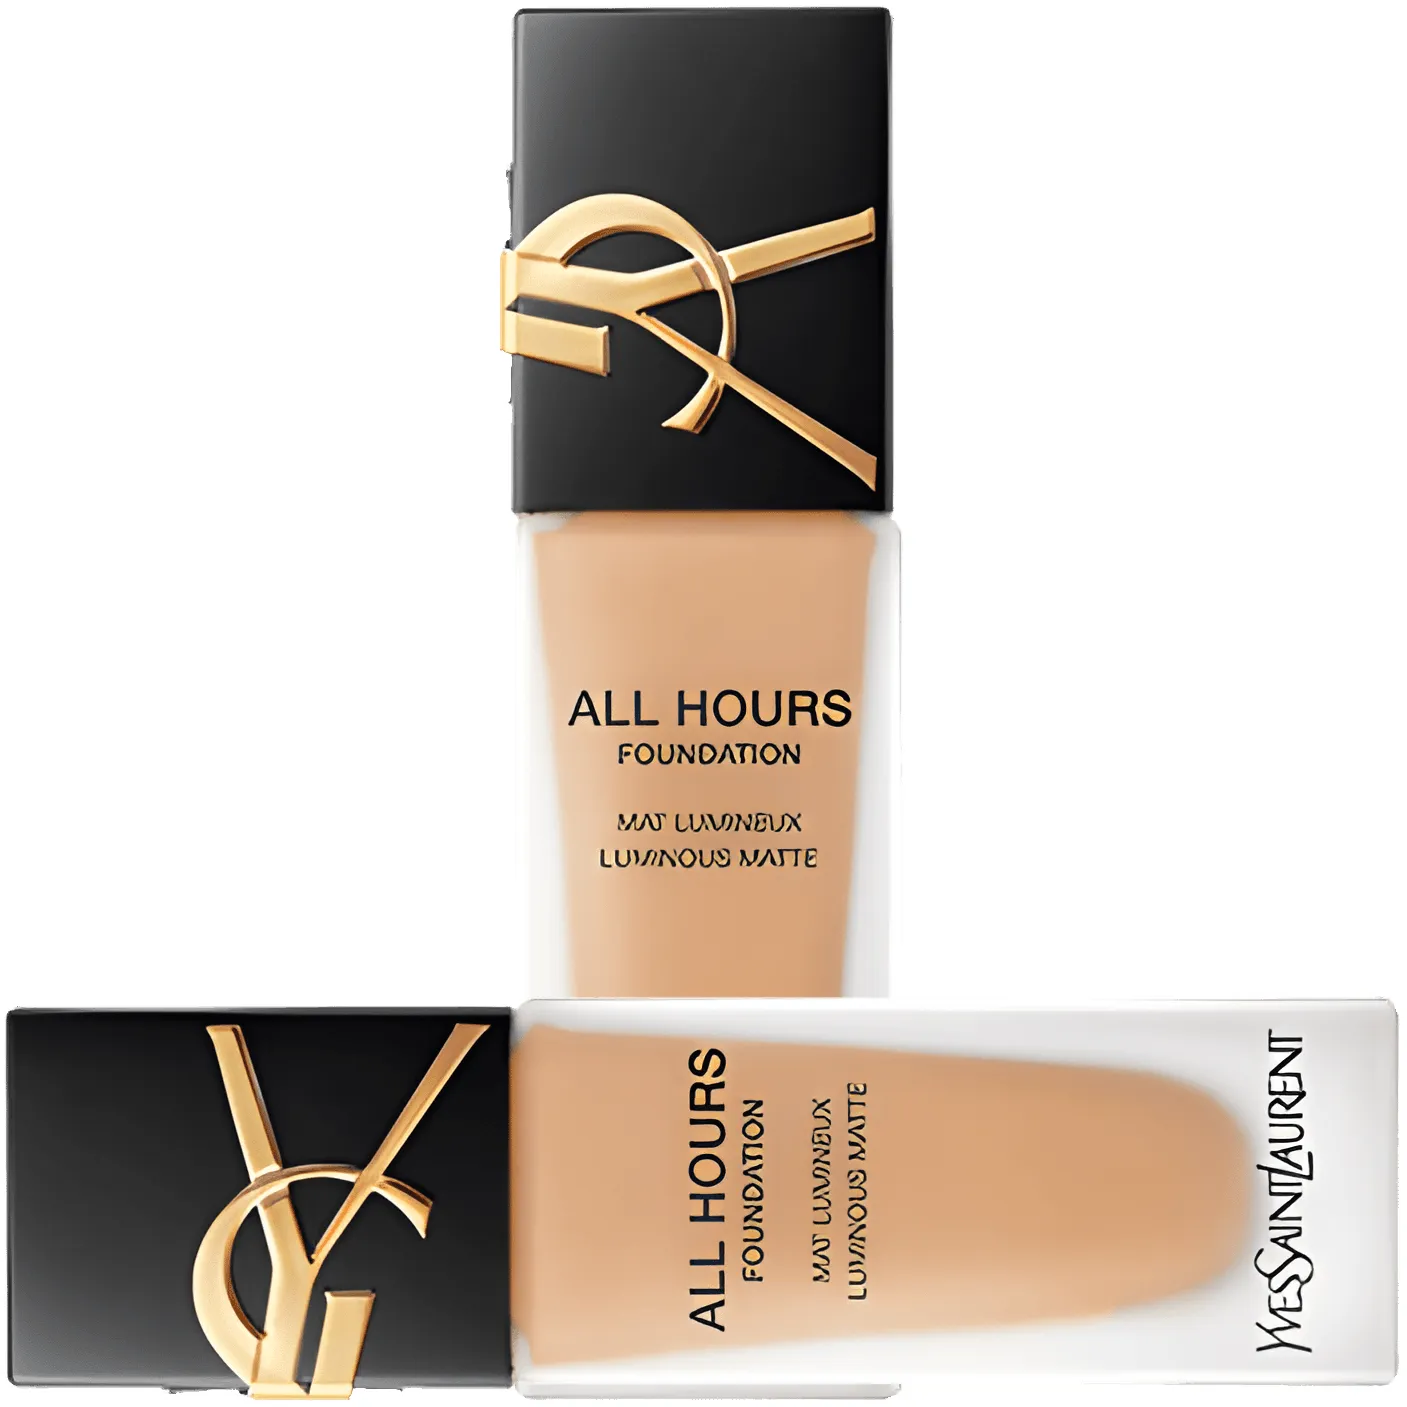 Free YSL All Hours Foundation